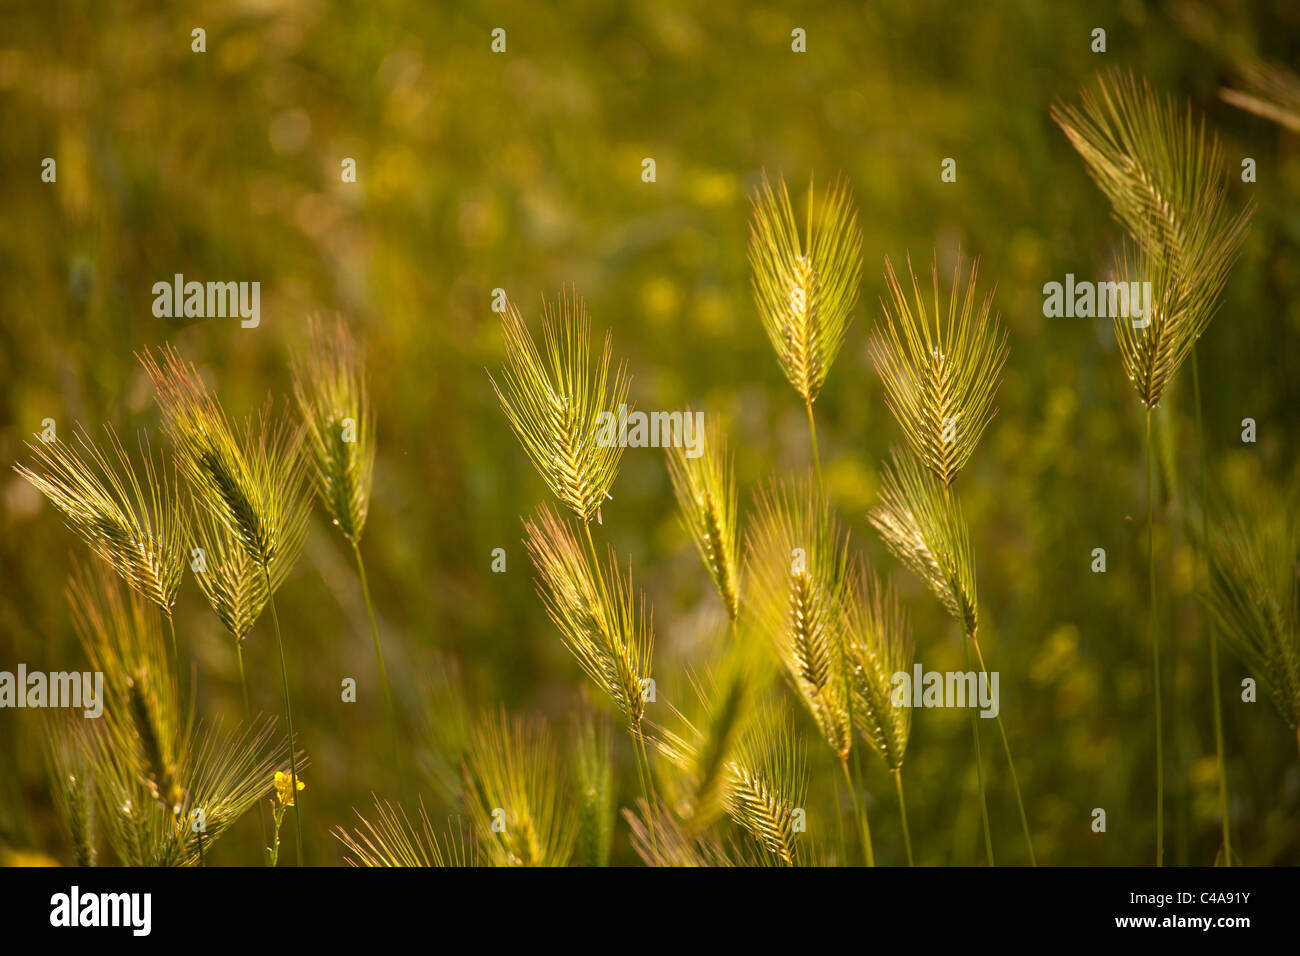 Cereal ears in the evening light, Sithonia, Chalkidiki, Greece Stock Photo